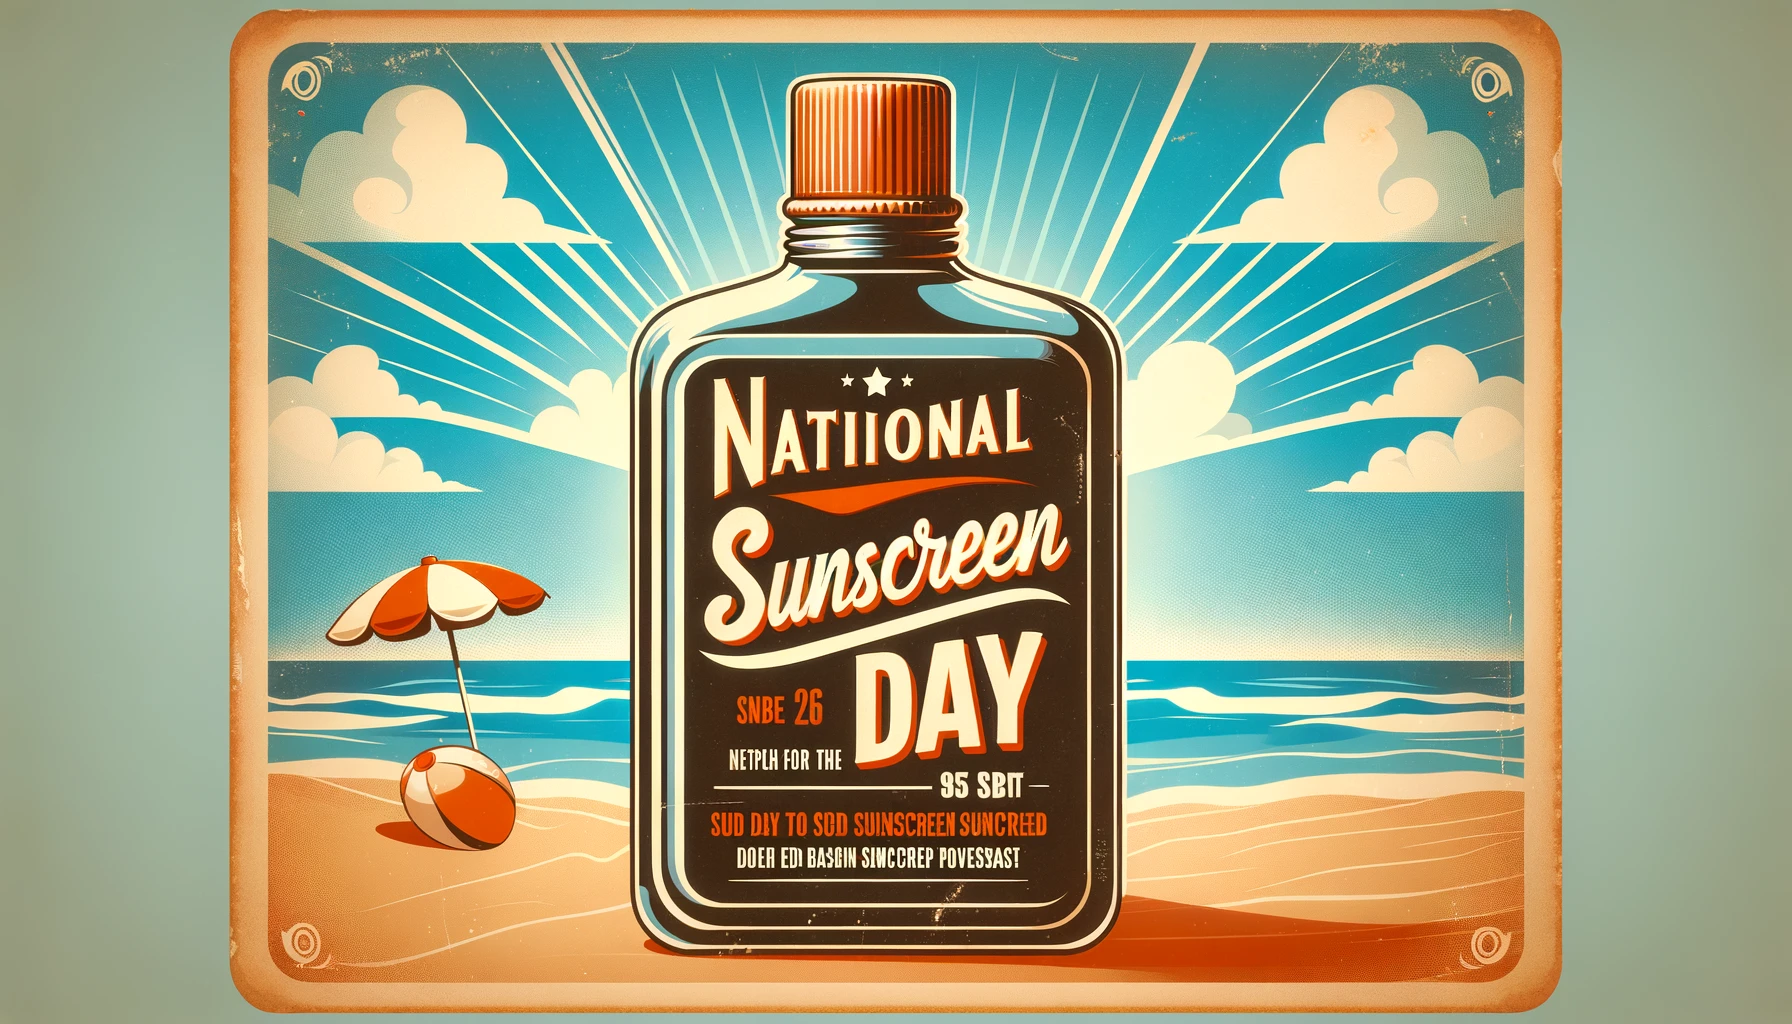 Inspiring Sunscreen Day Greetings for Healthy Skin